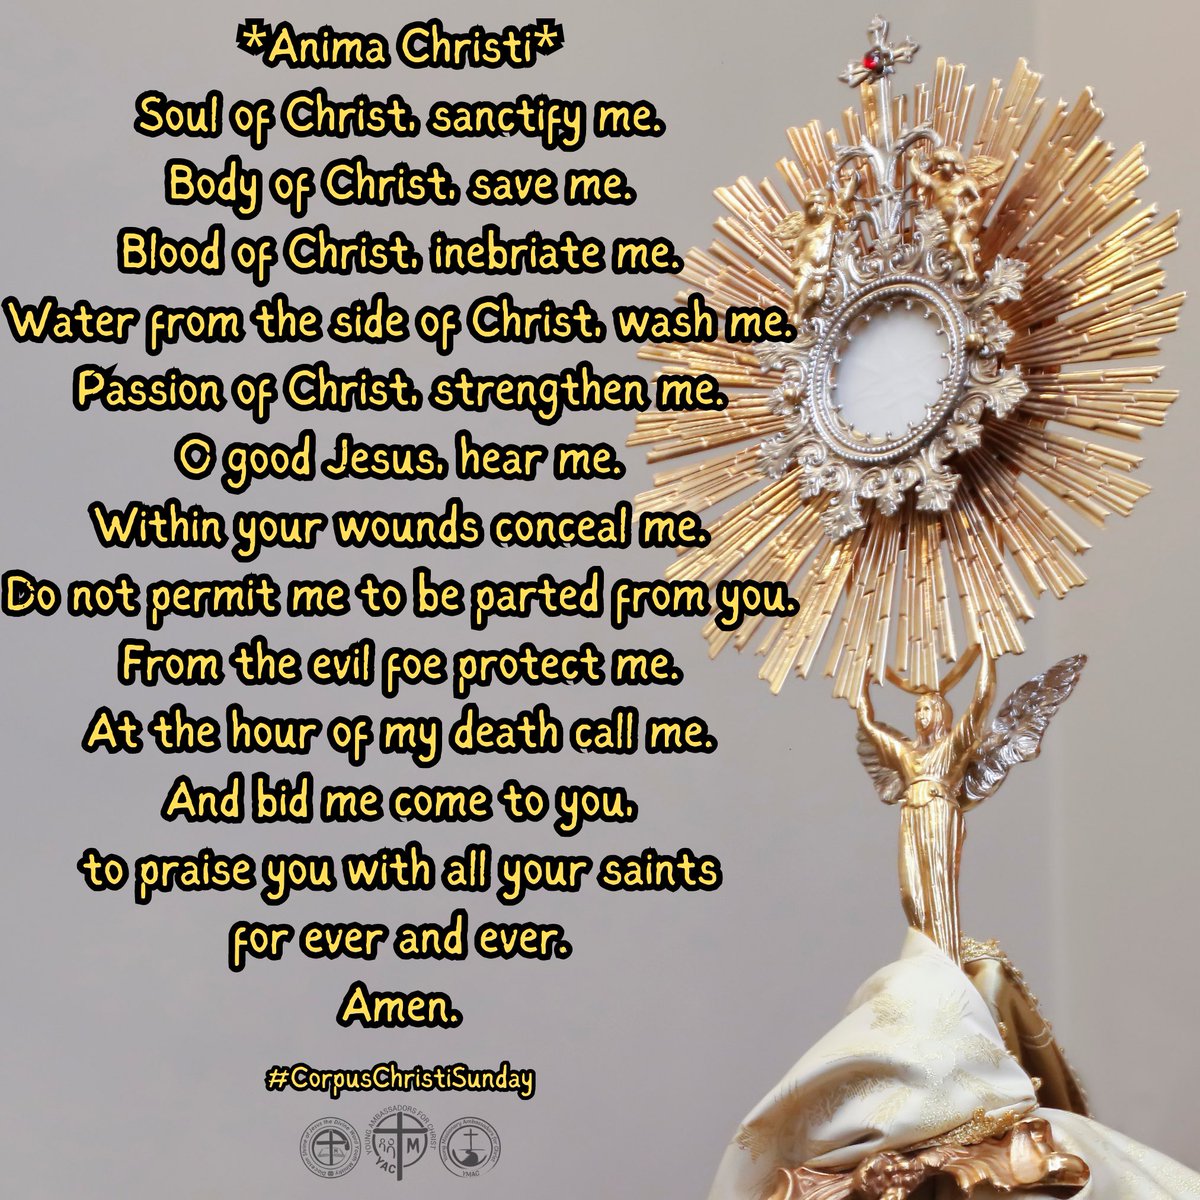 #CorpusChristiSunday

***
May the holy Triune God and Our Dear Blessed Mother bless you always and in all ways! 

#YAC #YMAC #SYM #SVDyouth 
#SHRINEyouthMinistry #ShrineYouth